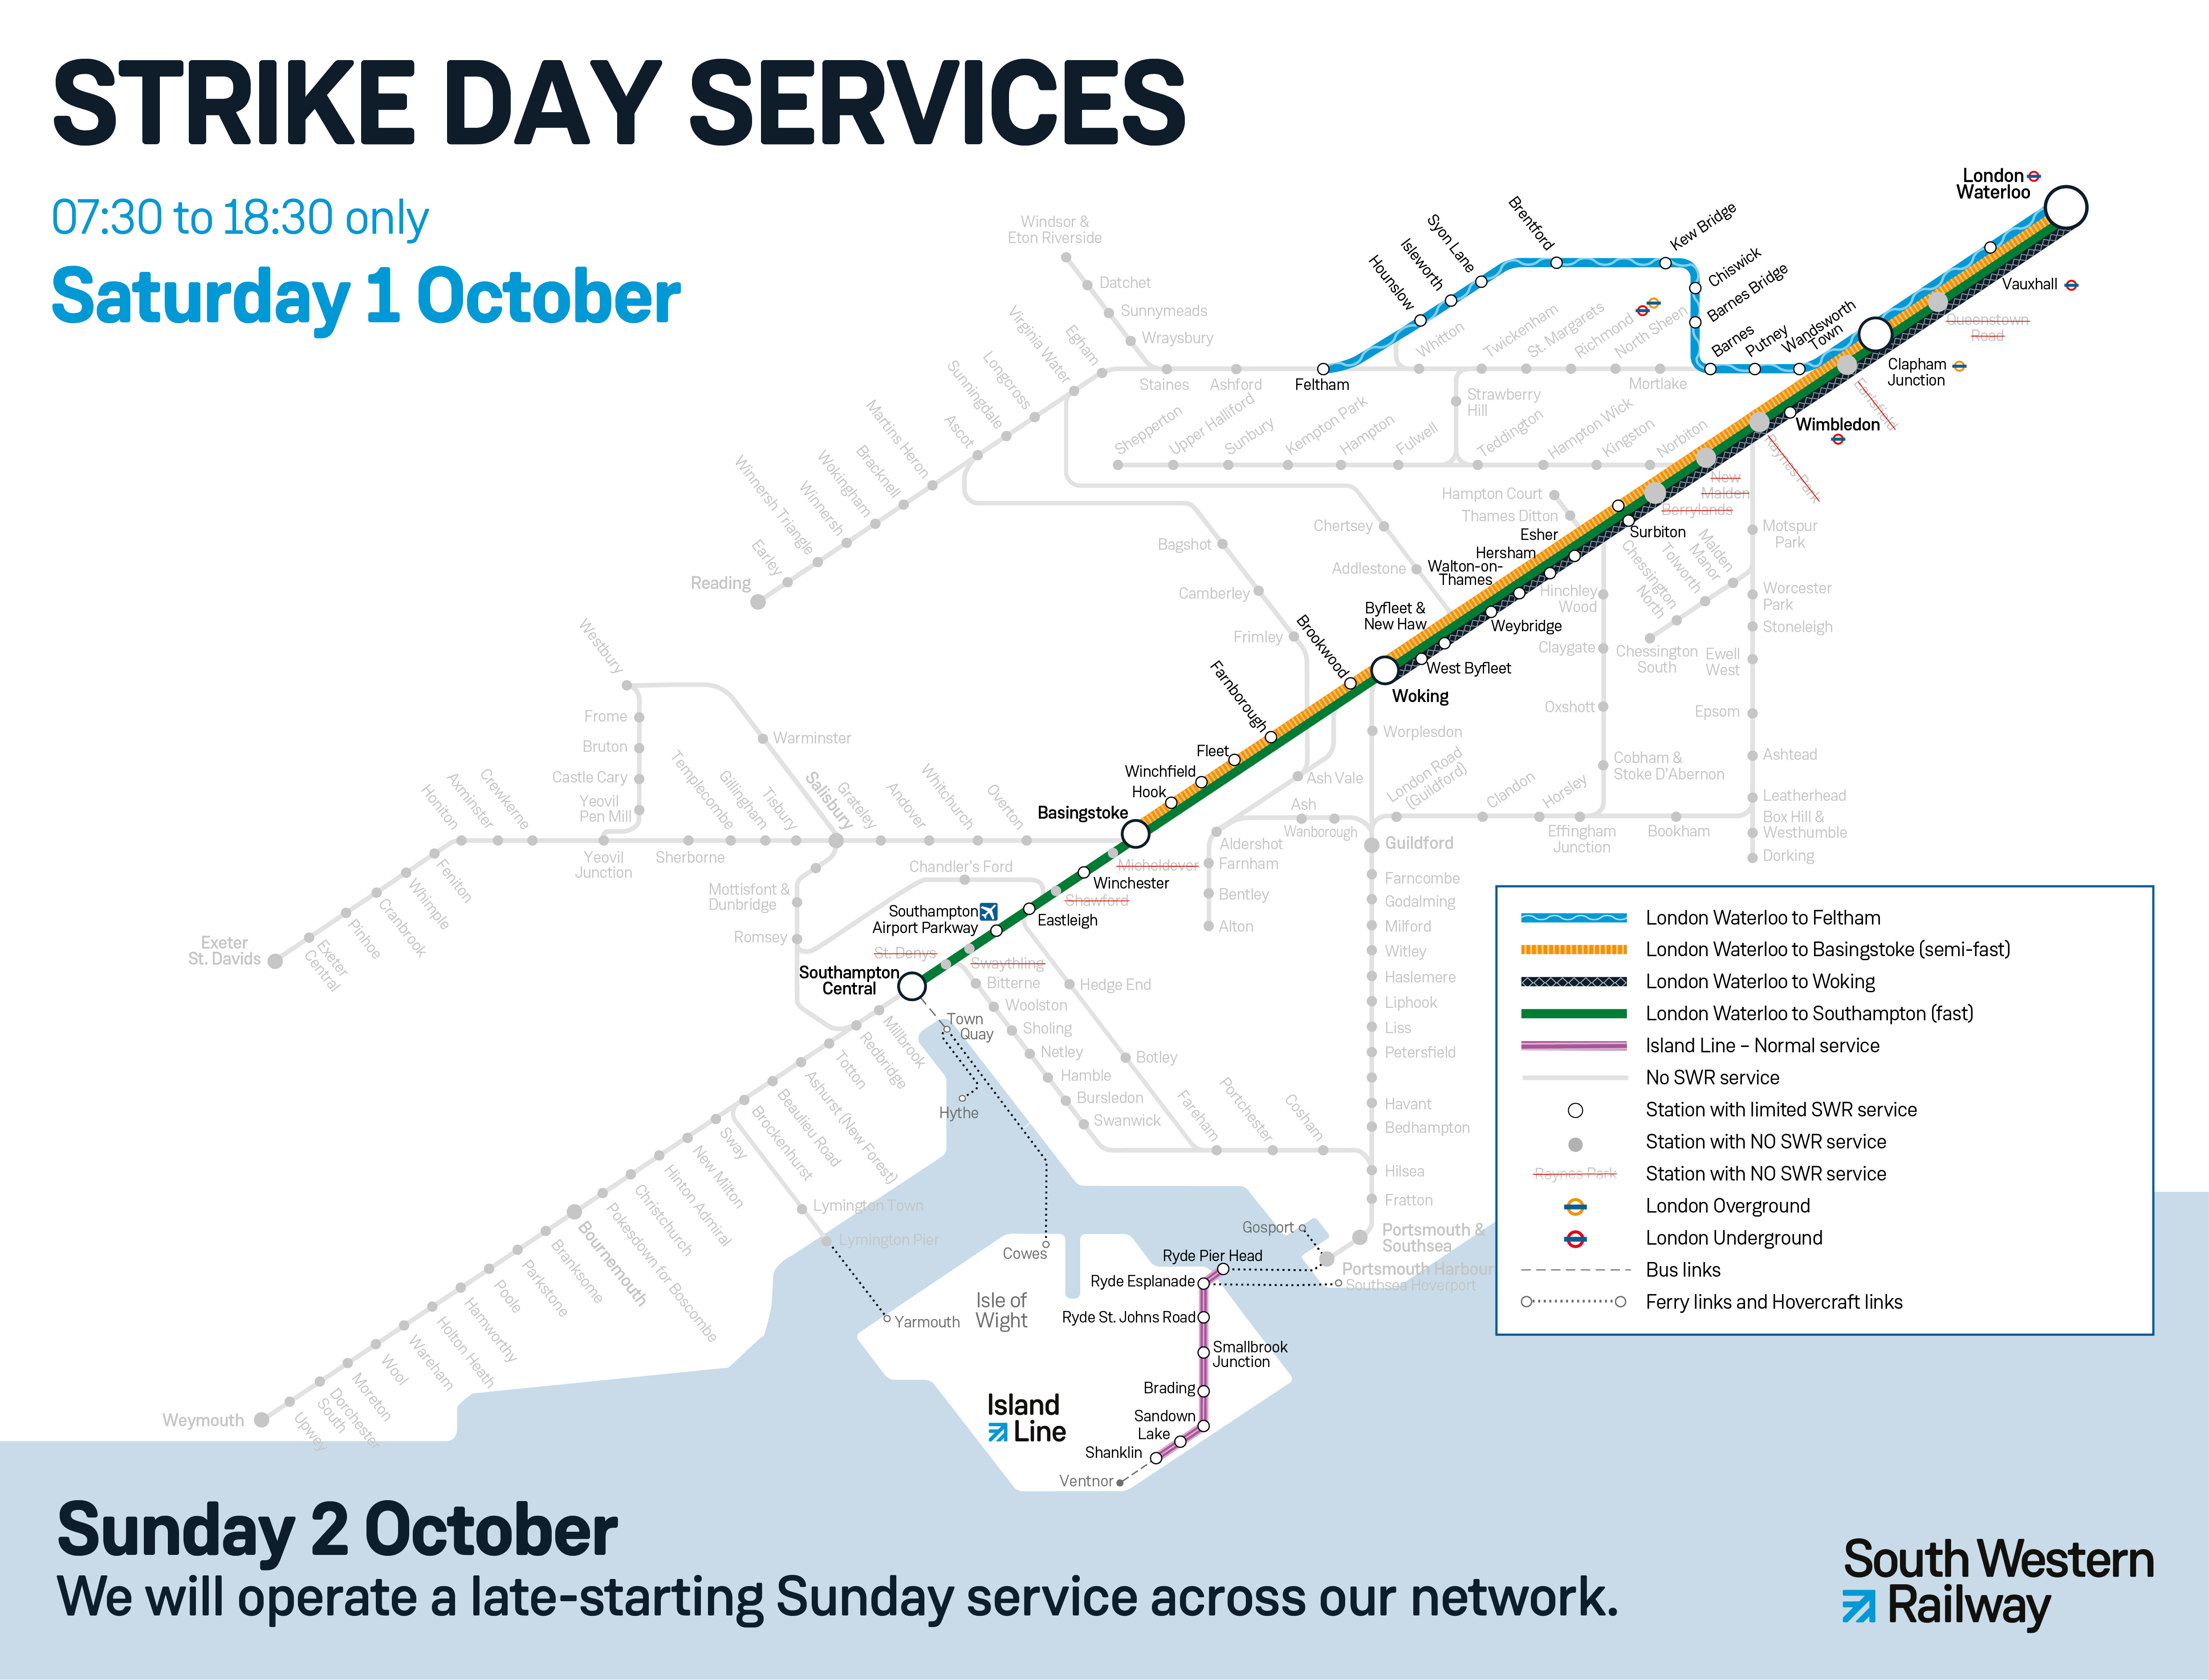 South Western Railway network map - where services are running on strike days